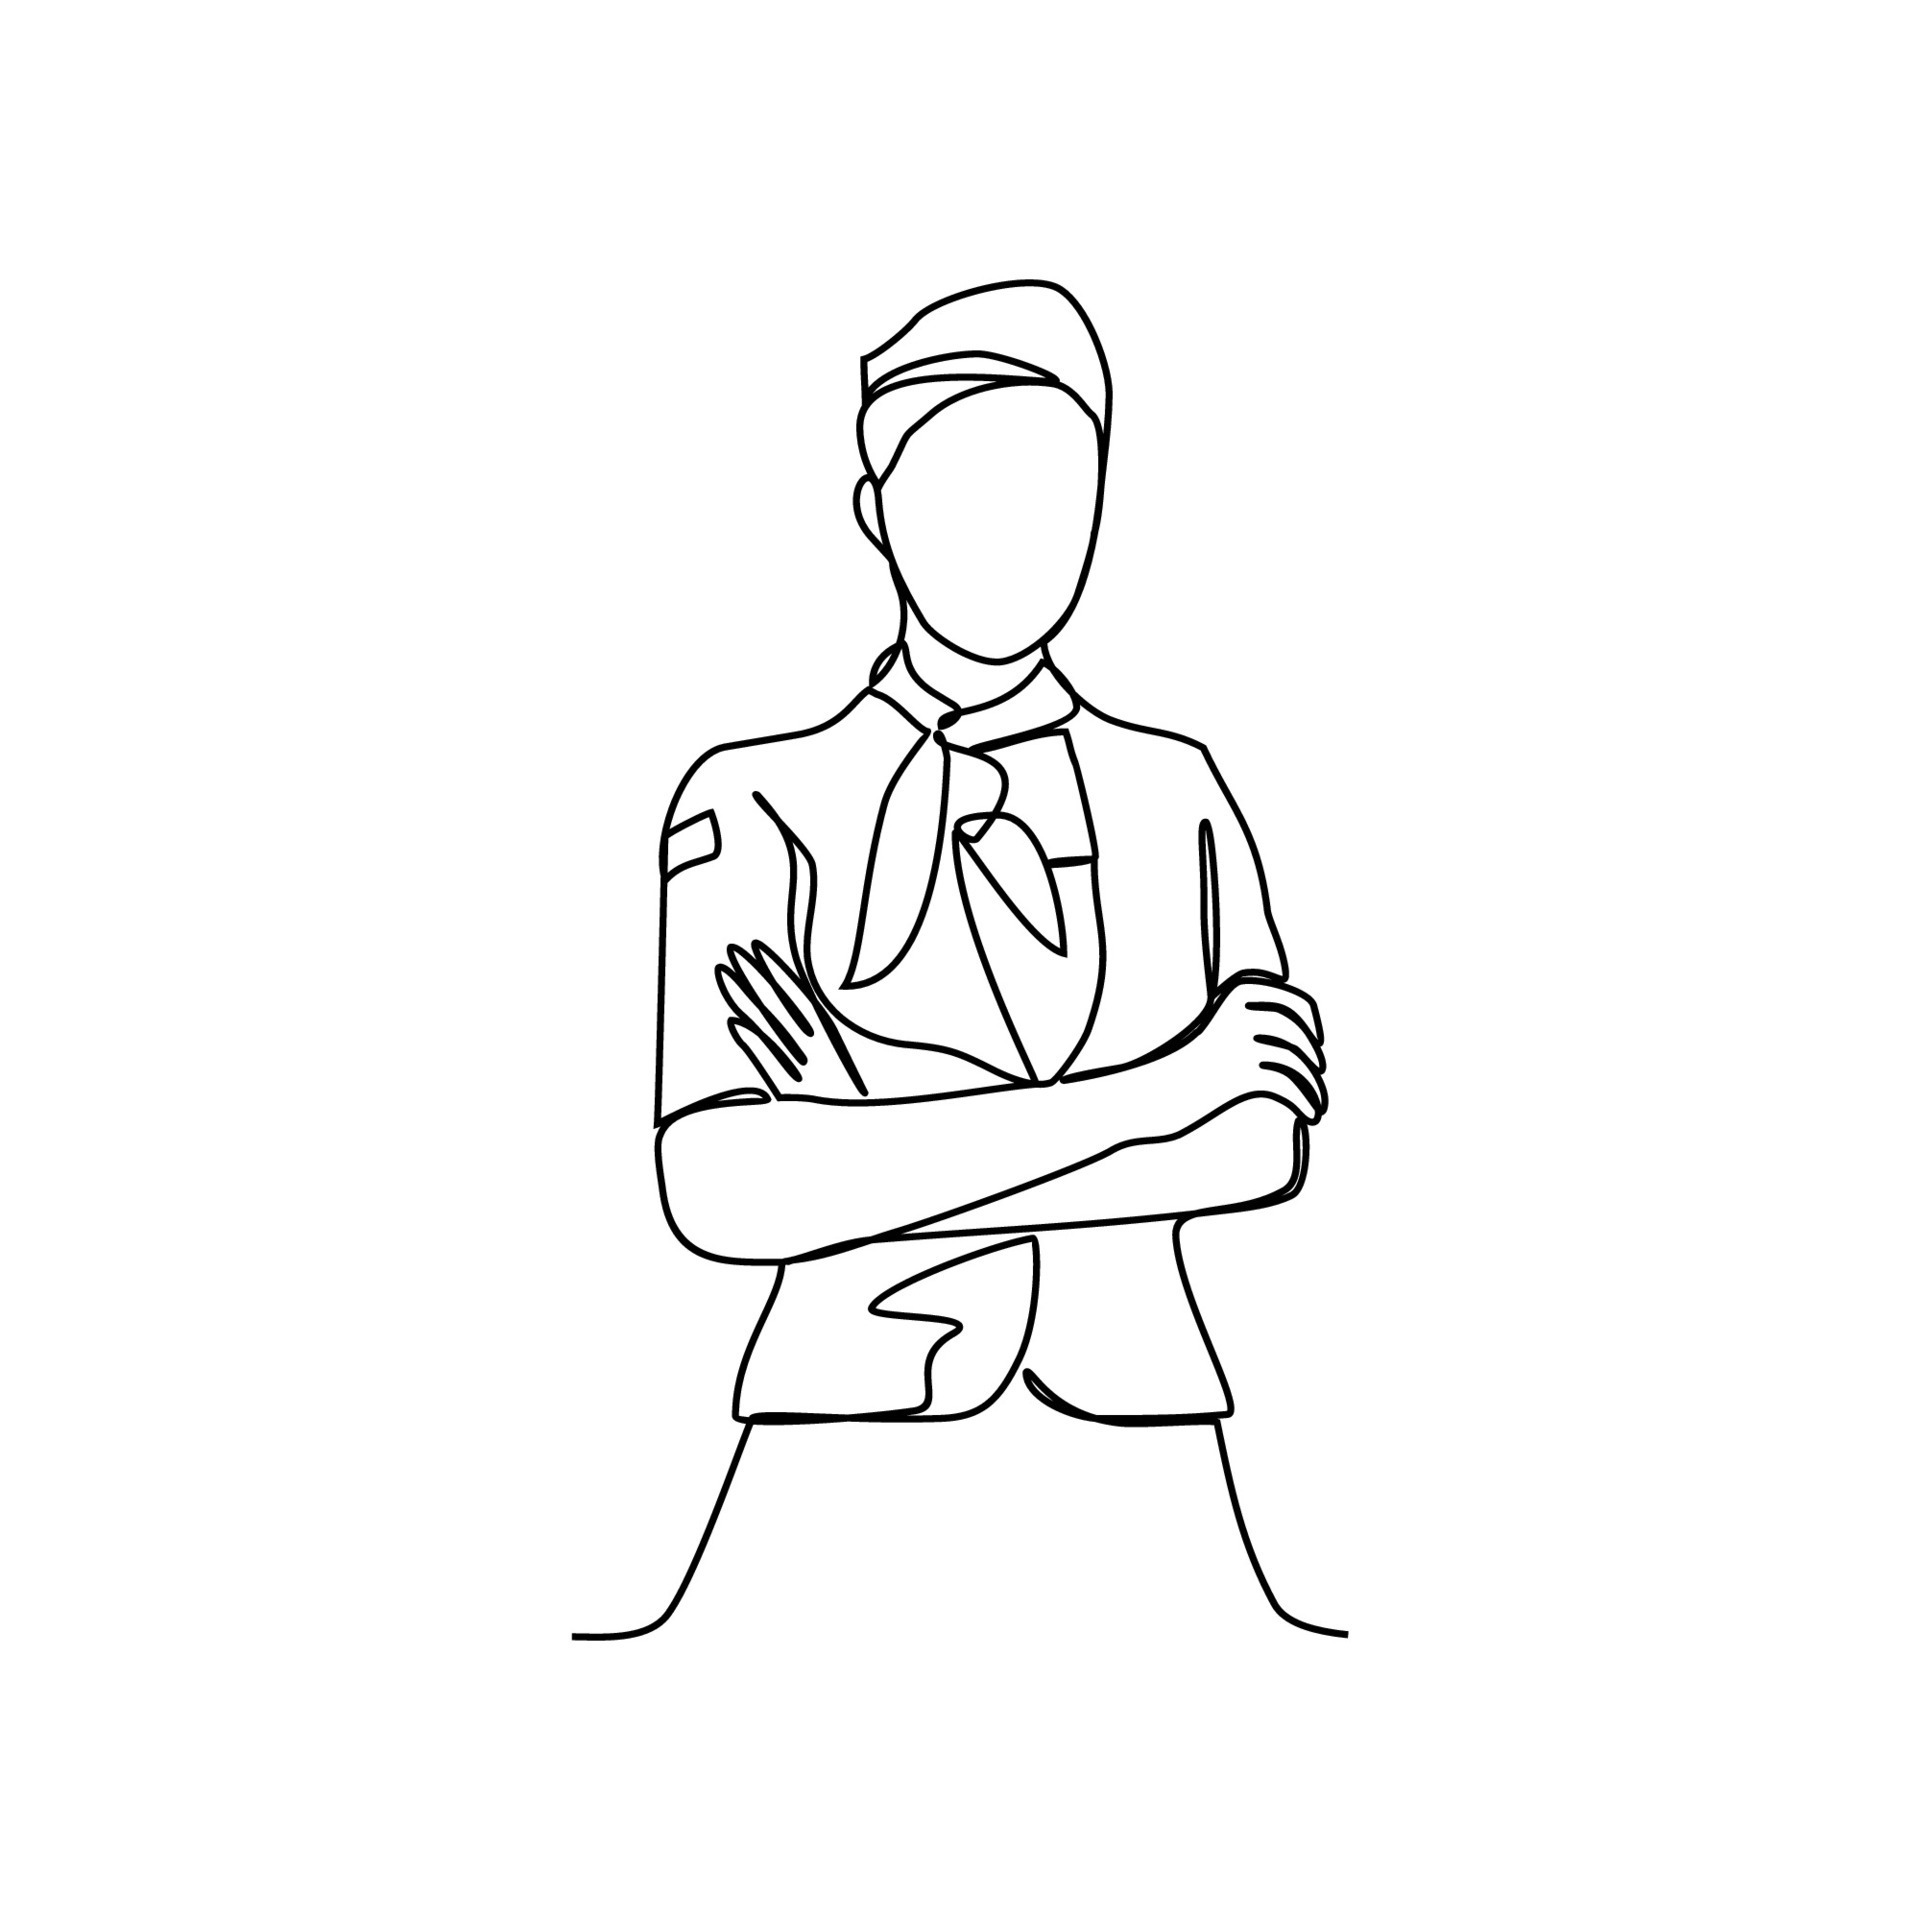 One continuous line drawing of Flight attendant profession with